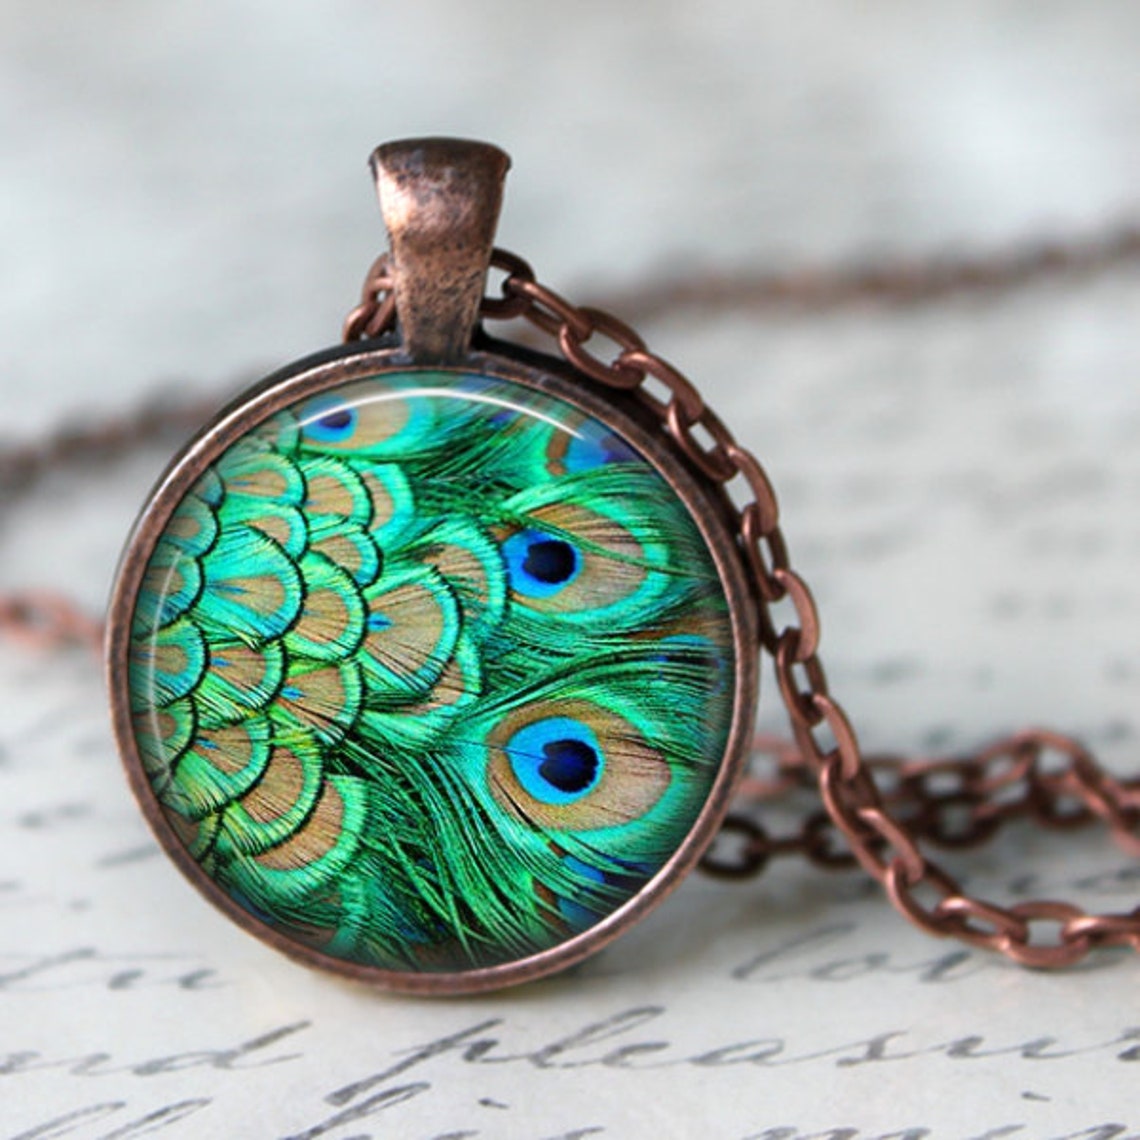 Peacock Feather Pendant Necklace or Key Chain Peacock - Etsy